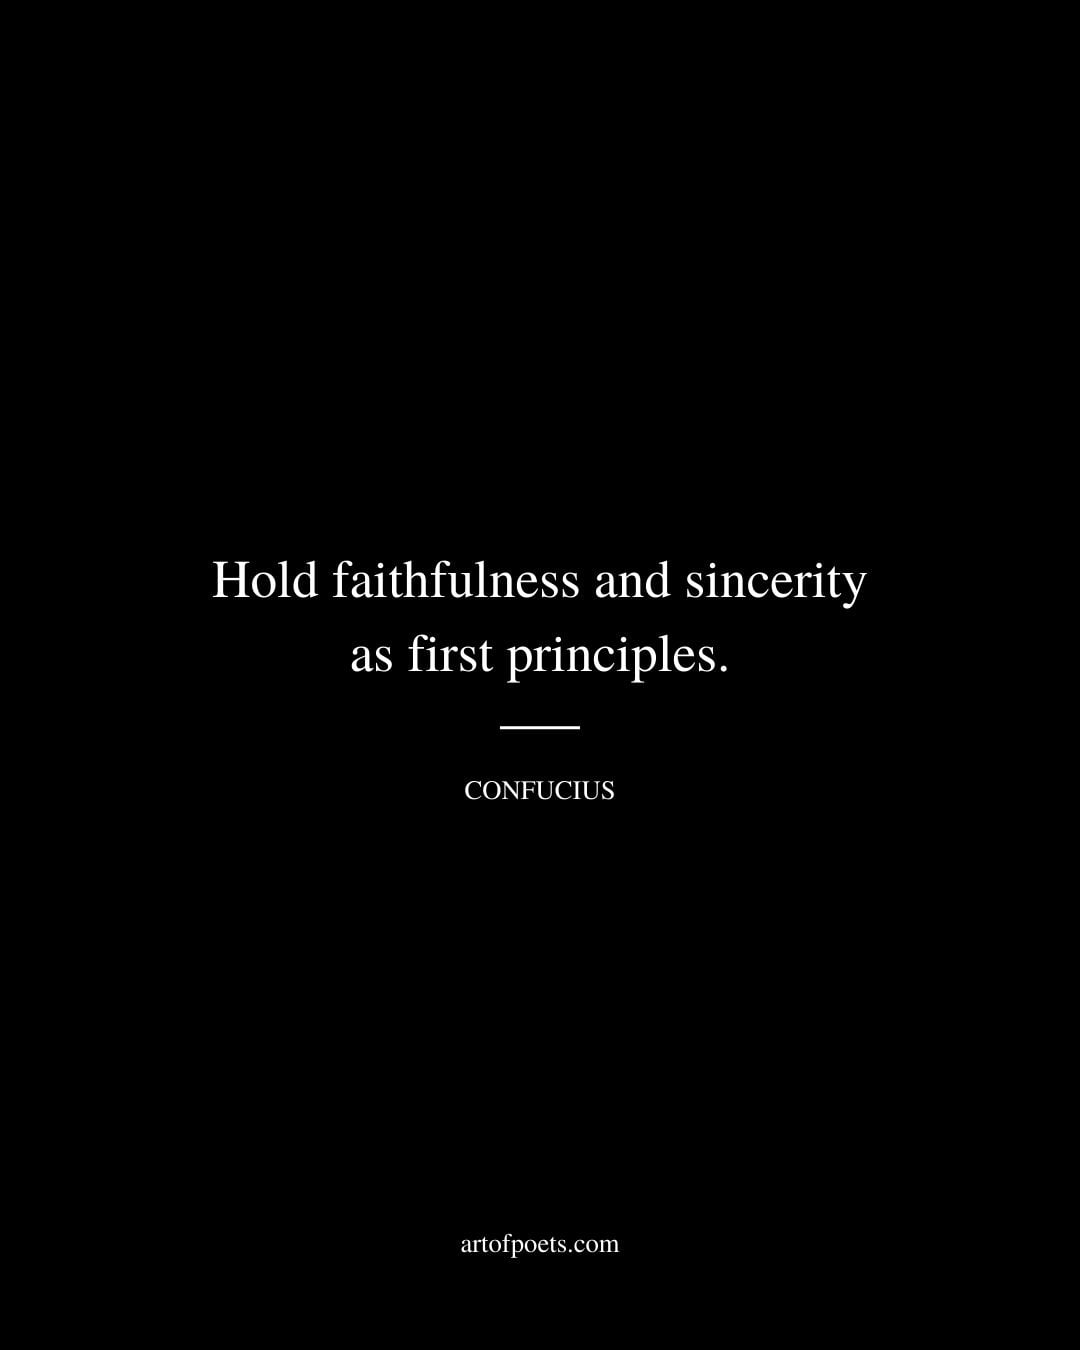 Hold faithfulness and sincerity as first principles